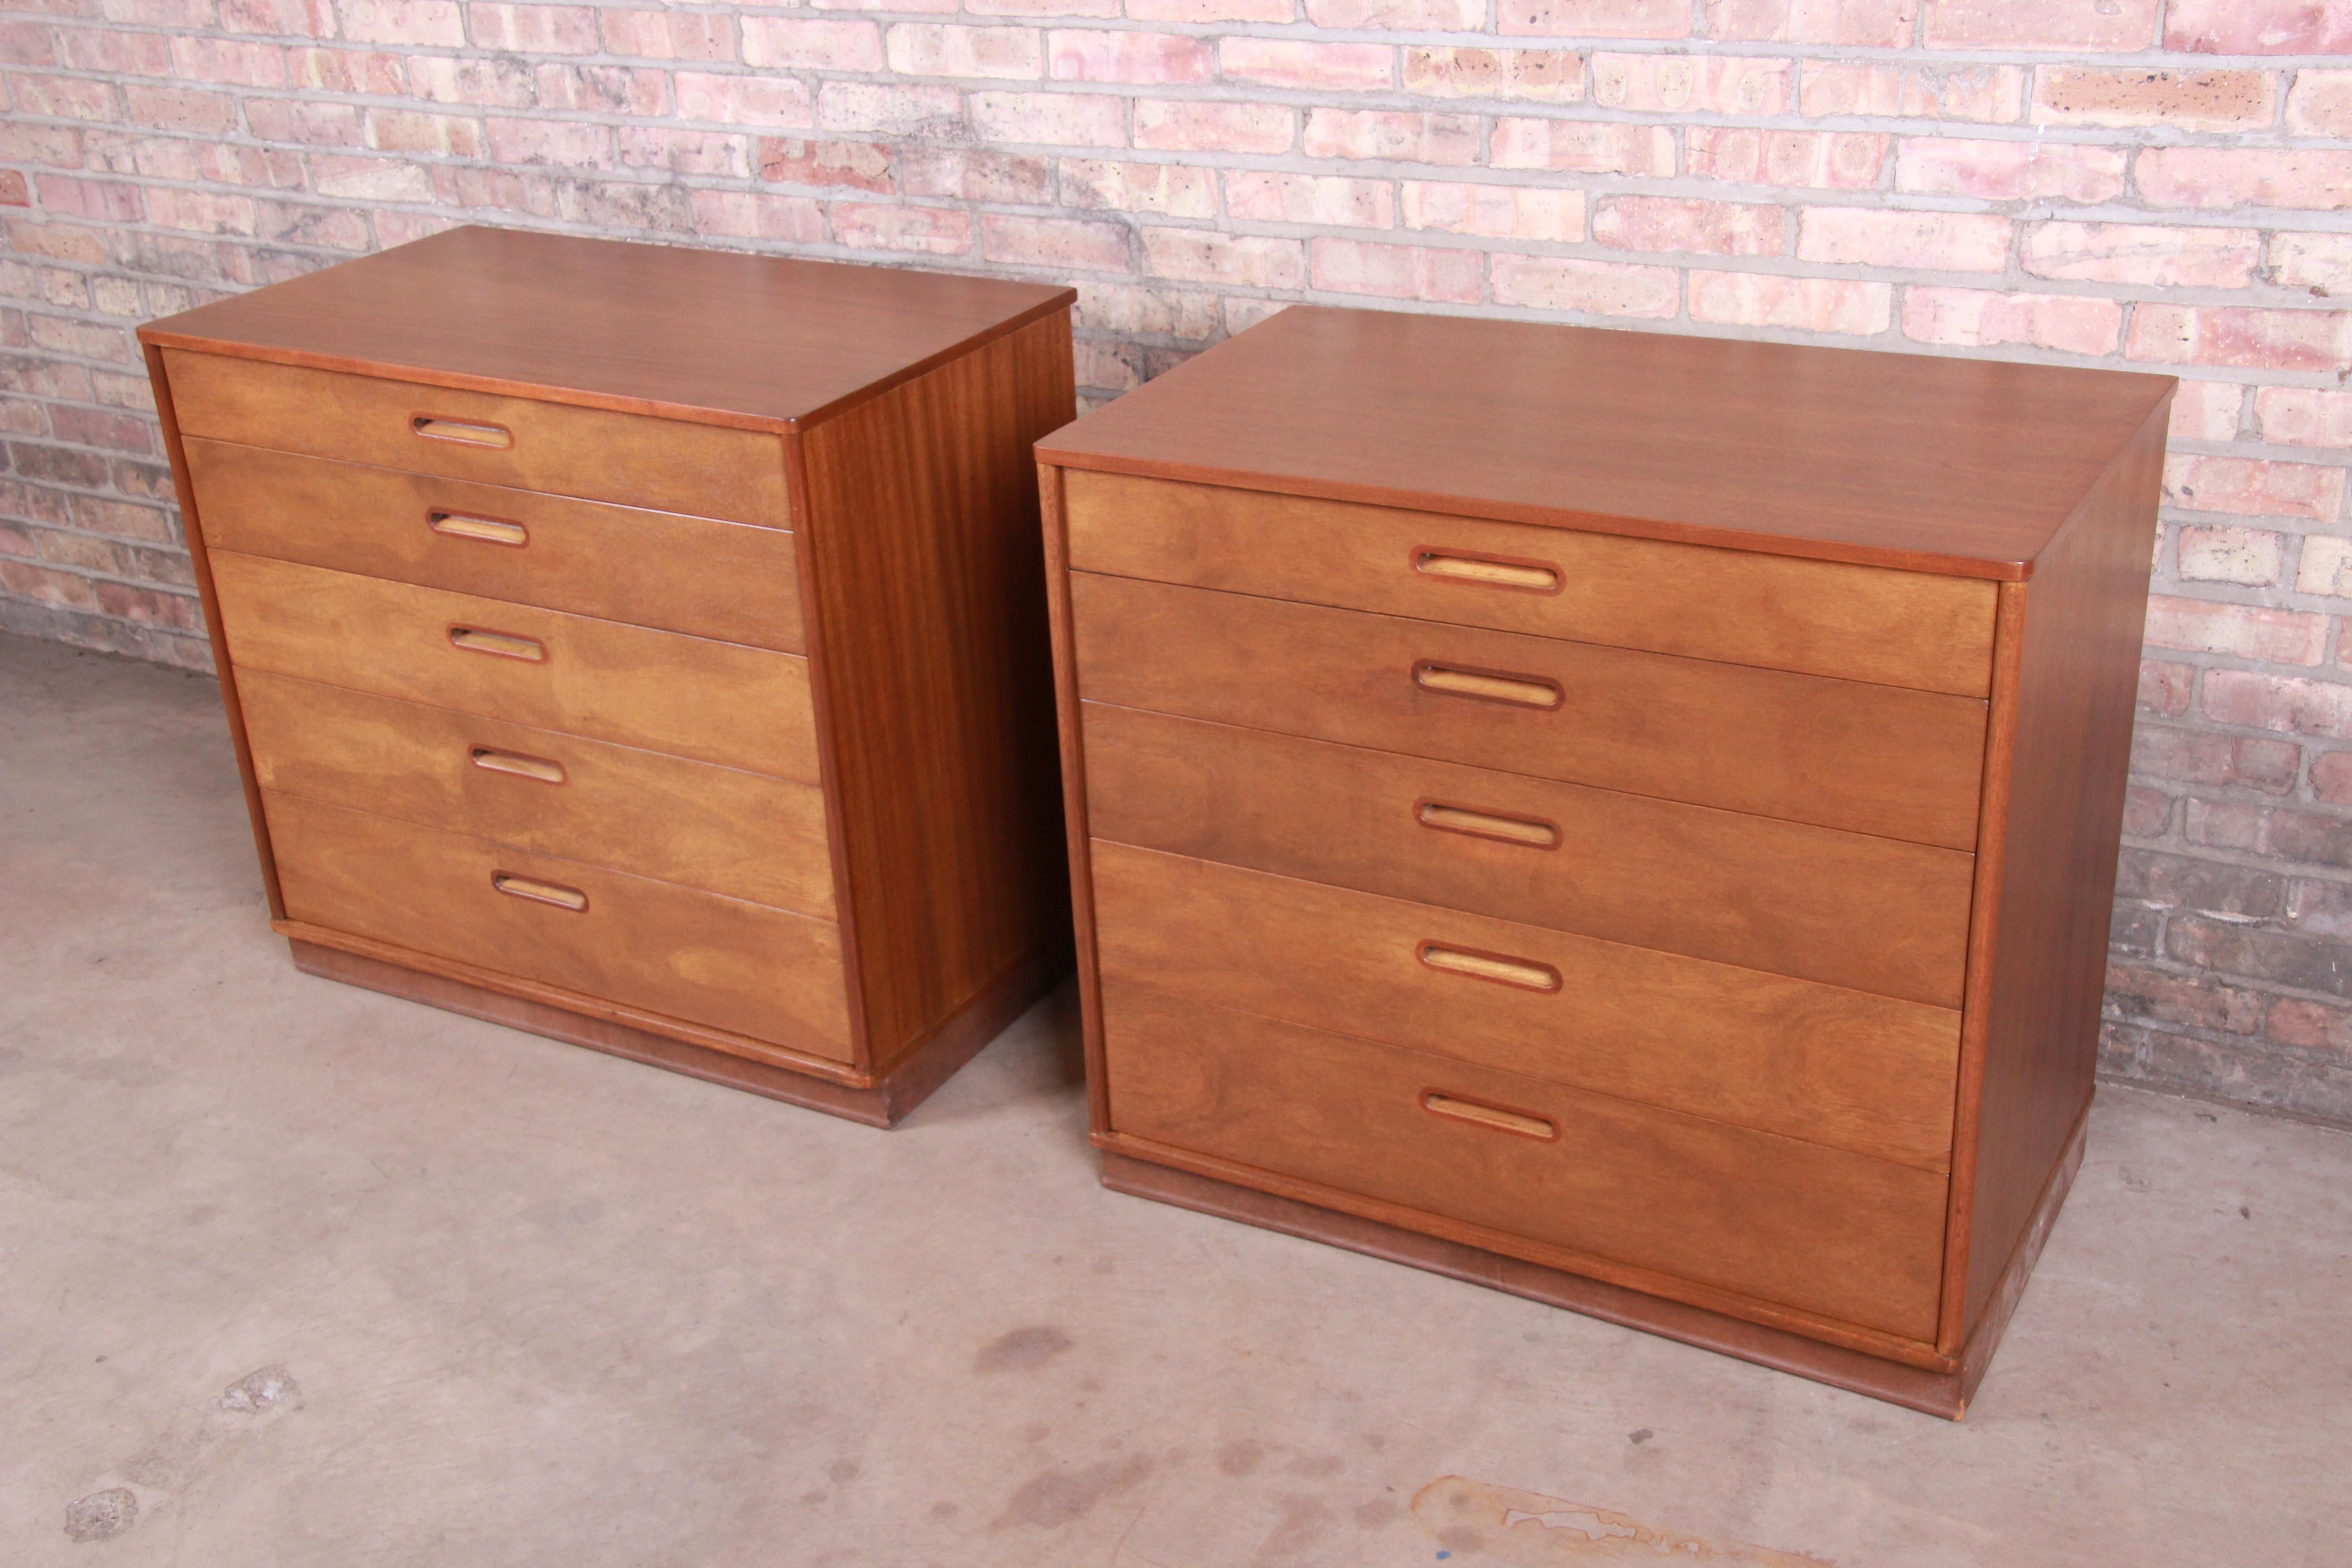 Bleached Edward Wormley for Dunbar Mahogany Bachelor Chests or Large Nightstands, Pair